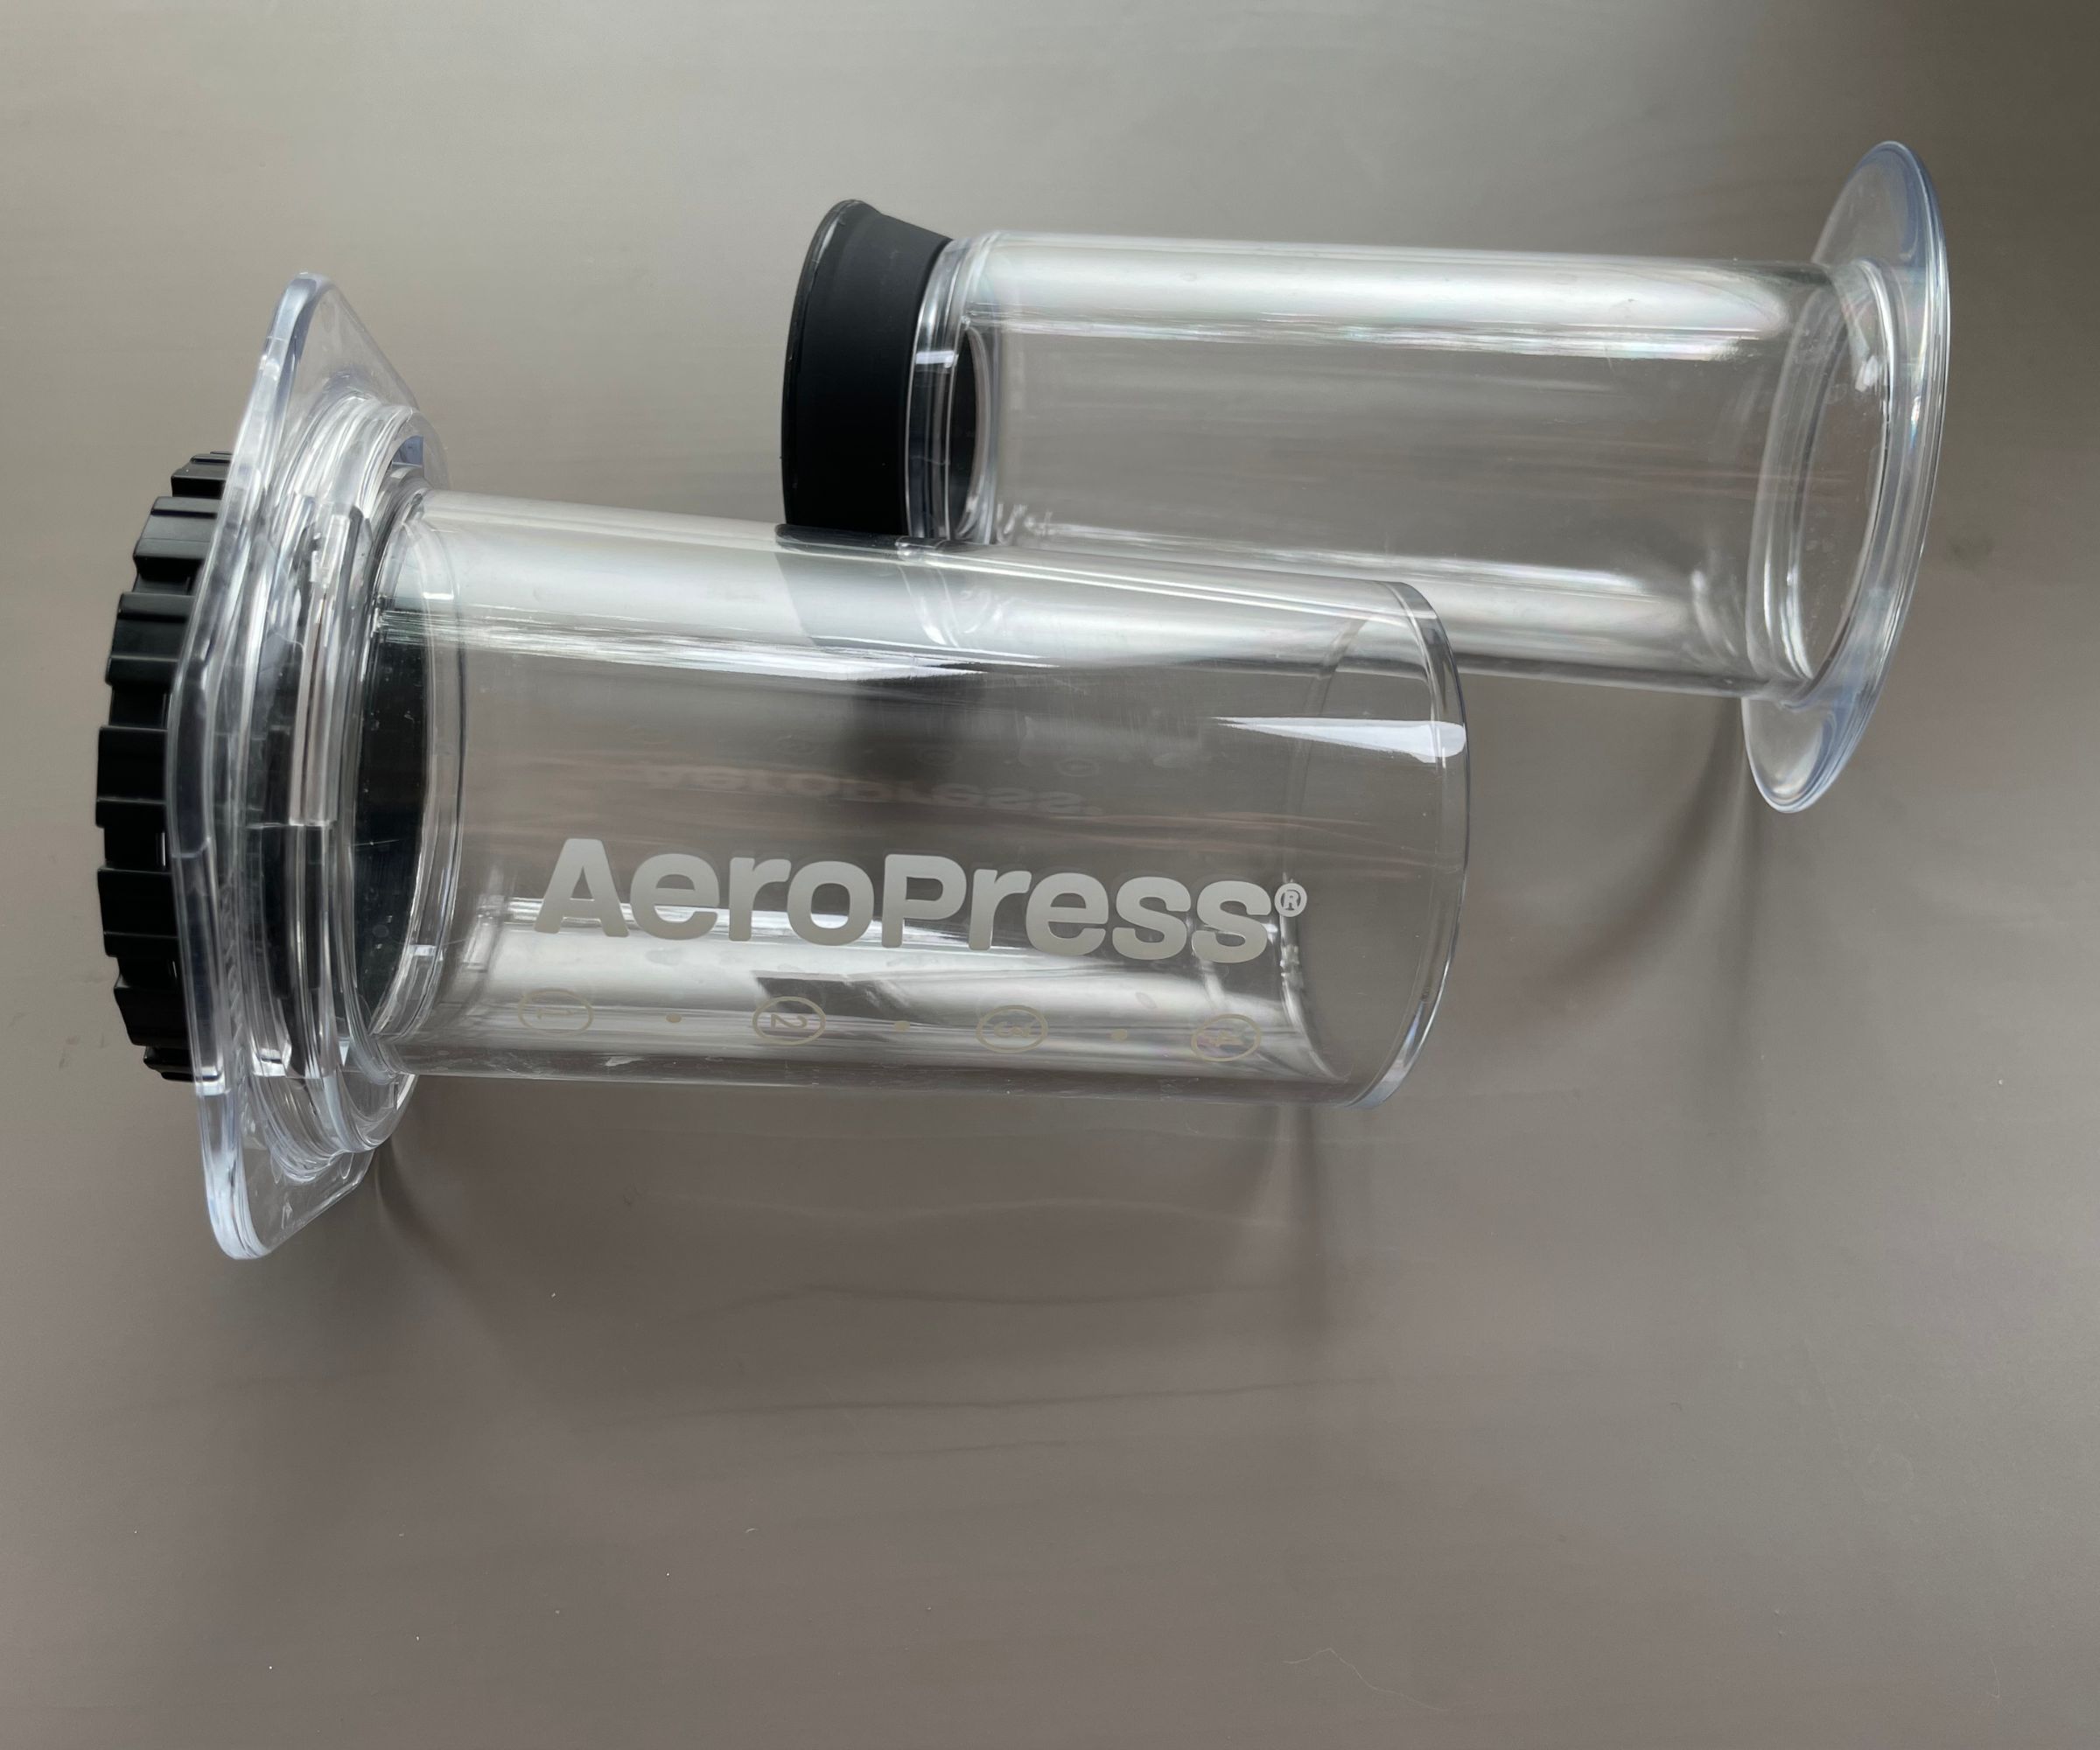 A clear AeroPress in parts on a table, ready to use to make The Ultimate AeroPress Recipe